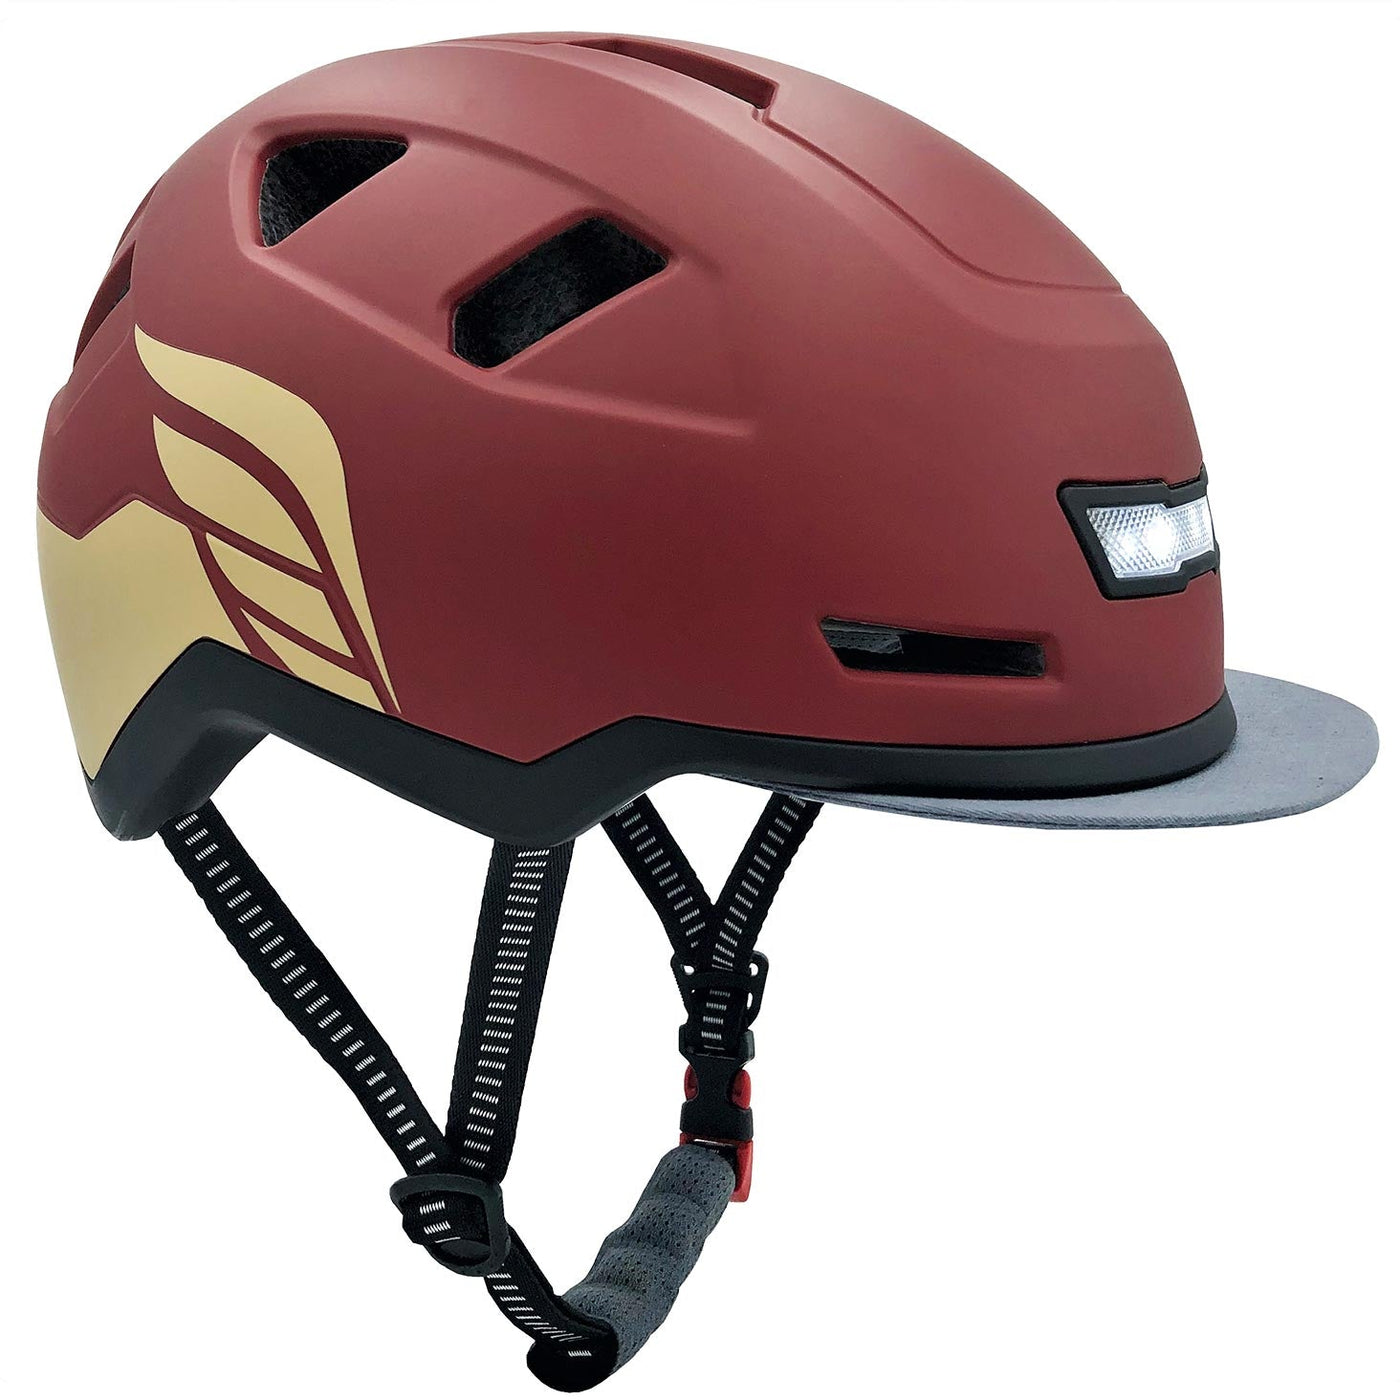 xnito ebike helmet front view of lights and visor